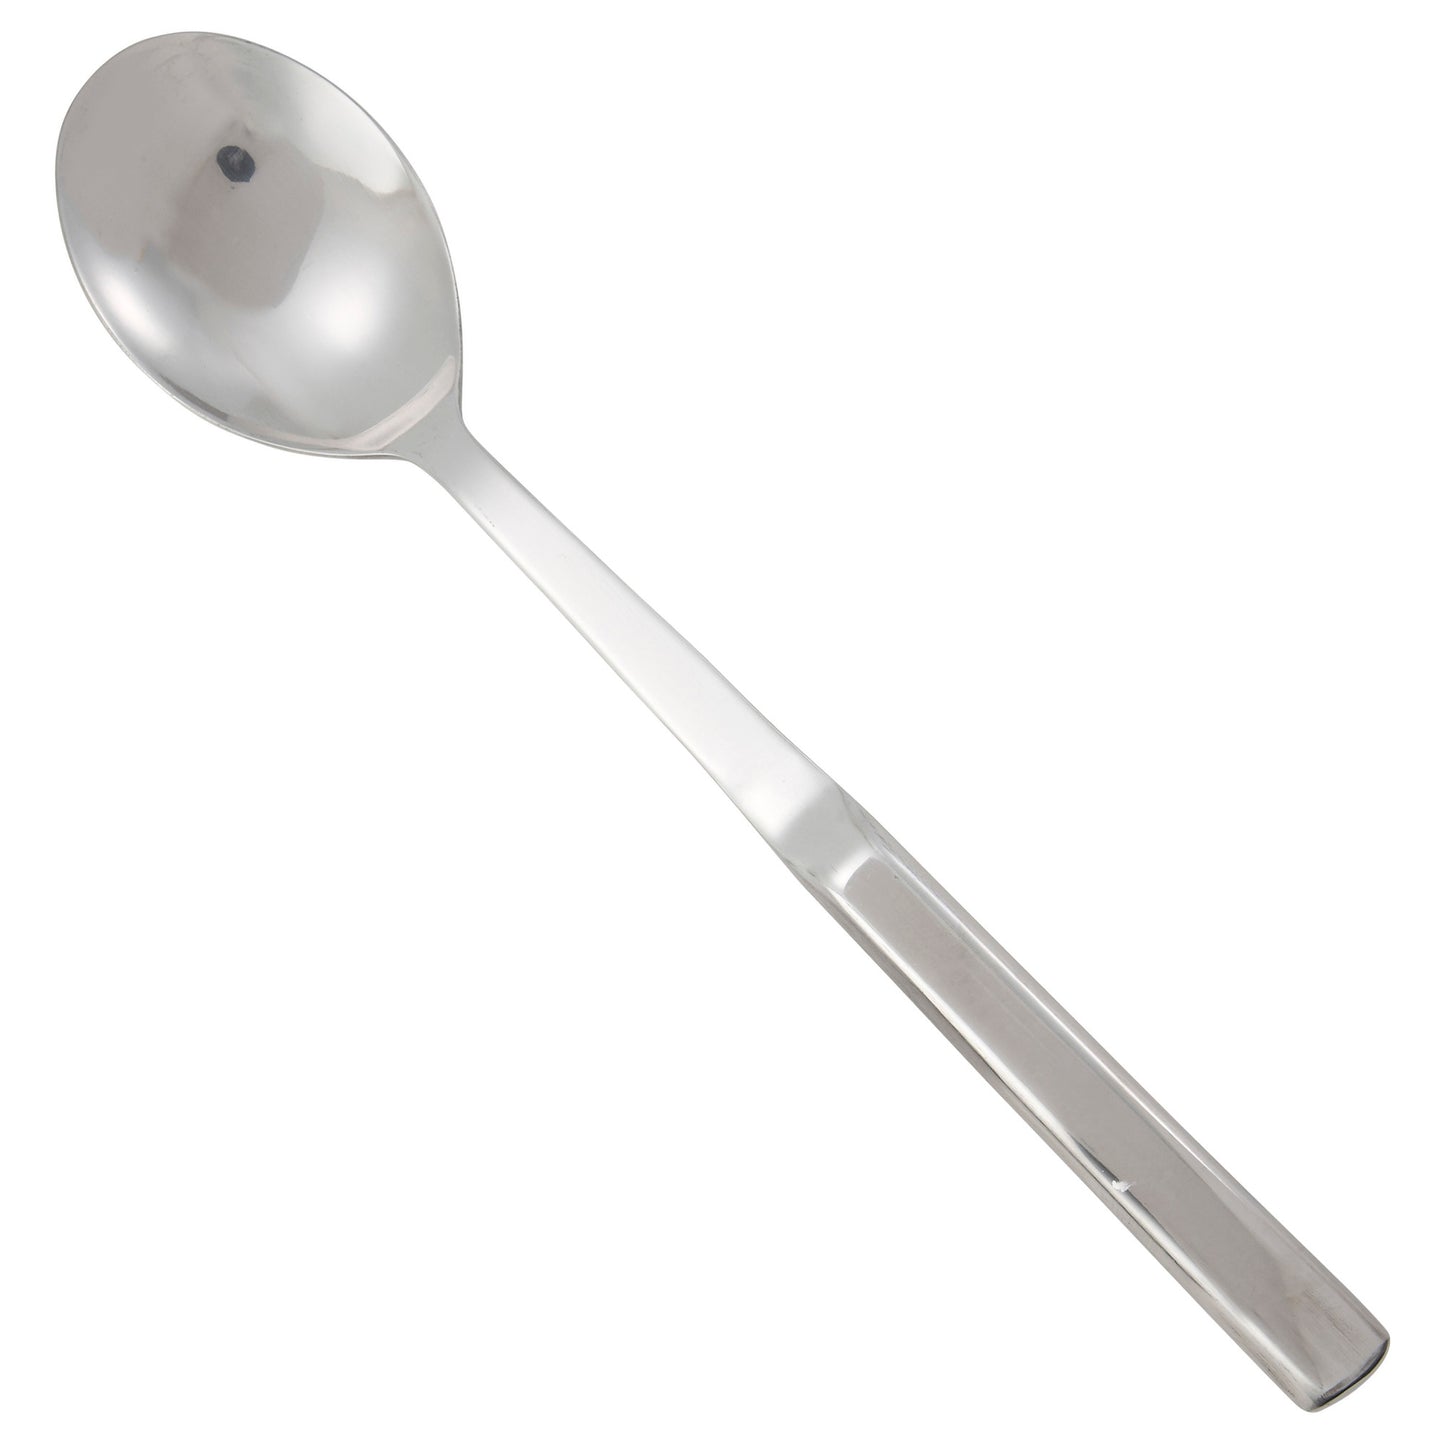 BW-SS1 - 11-3/4" Solid Spoon, Hollow Handle, Stainless Steel